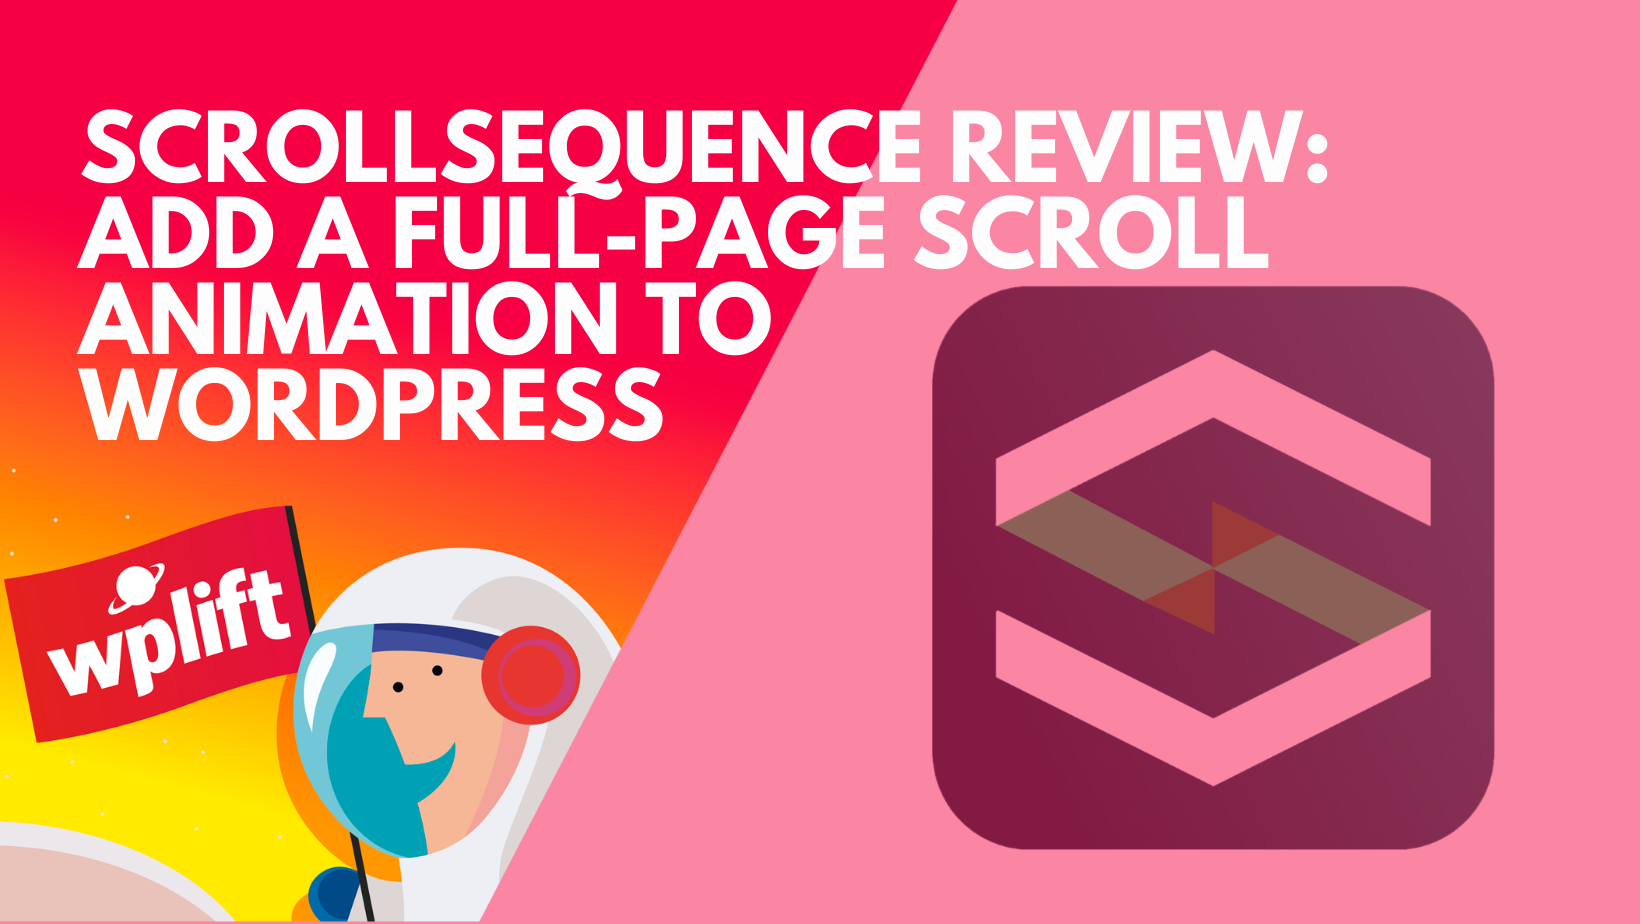 Scrollsequence Review: Add a Full-Page Scroll Animation to WordPress